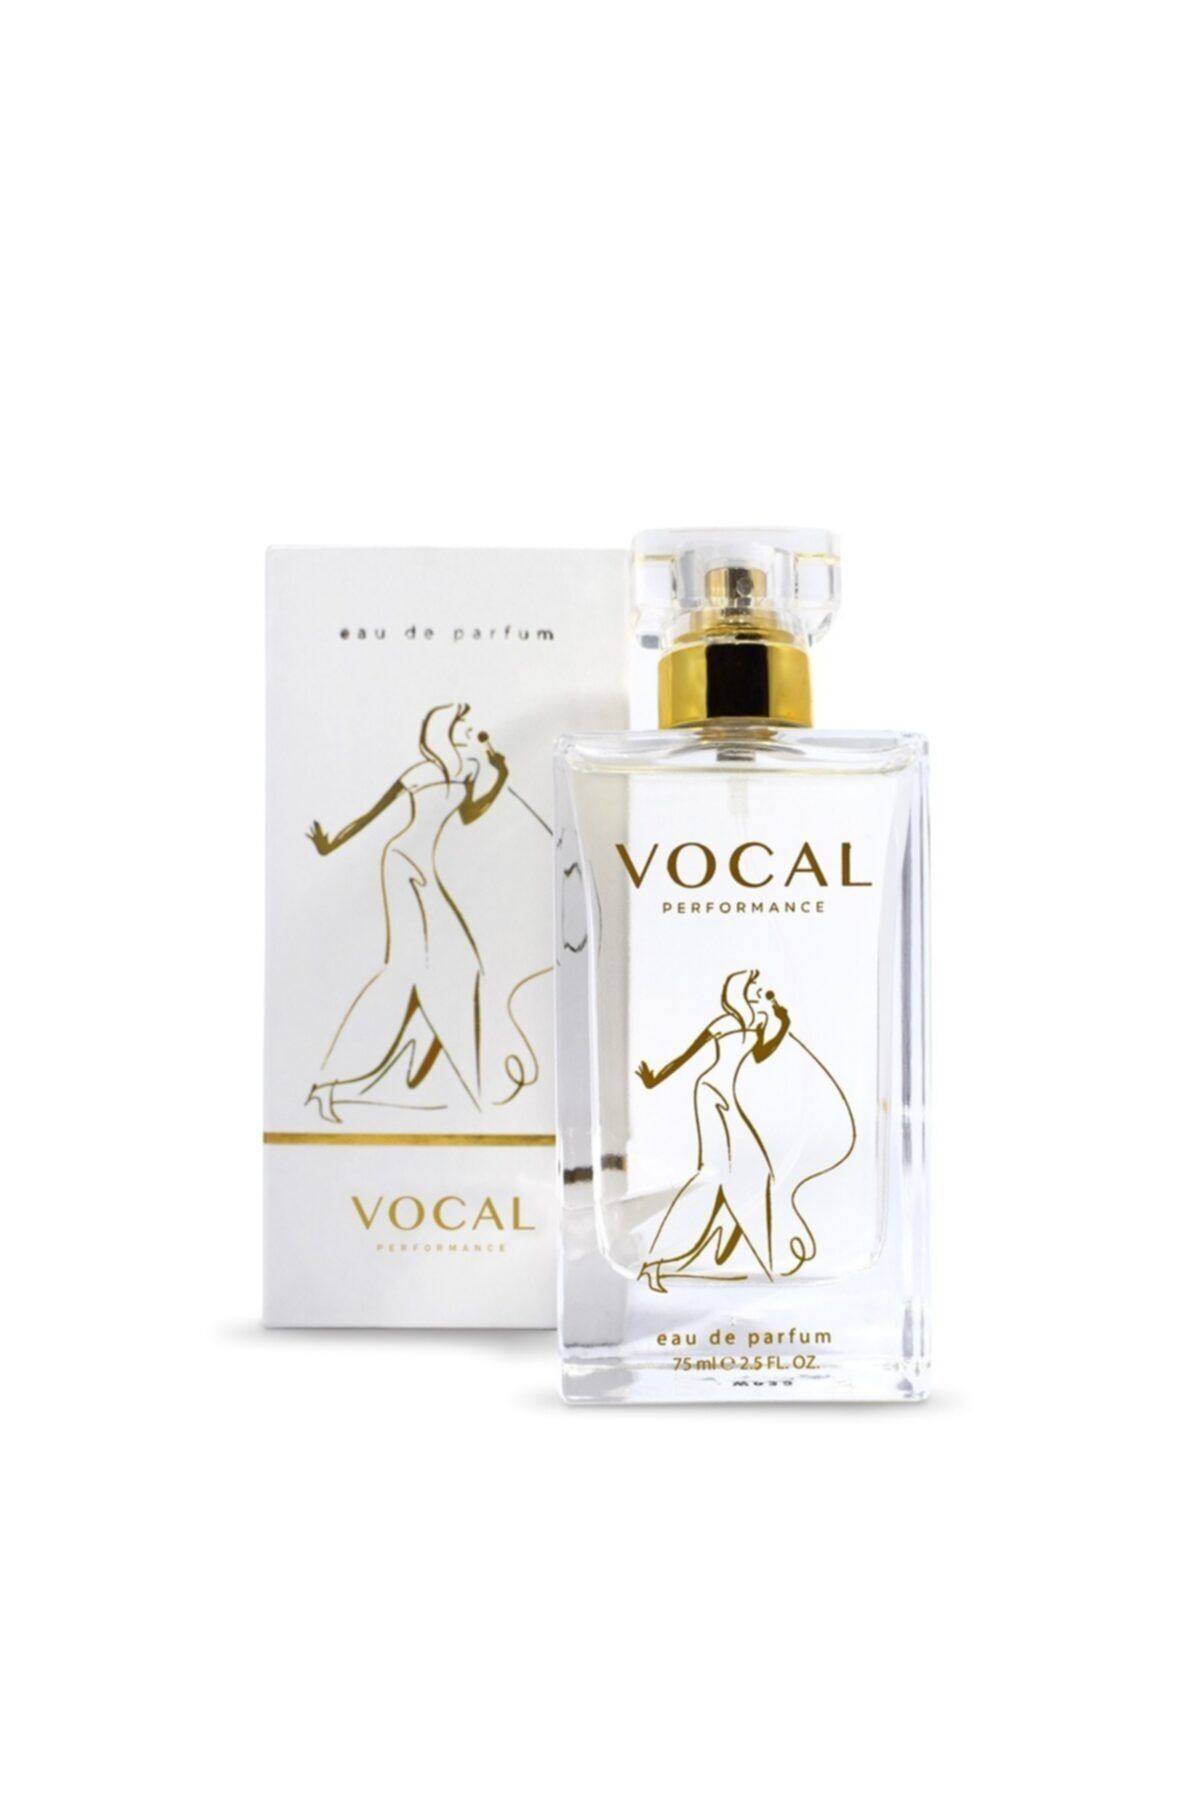 Eau De Parfum For Unisex Inspired By By Kilian Angels' Share 1.7 FL. OZ.  Perfume Version Fragrance Dupe Consentrated Long Lasting 